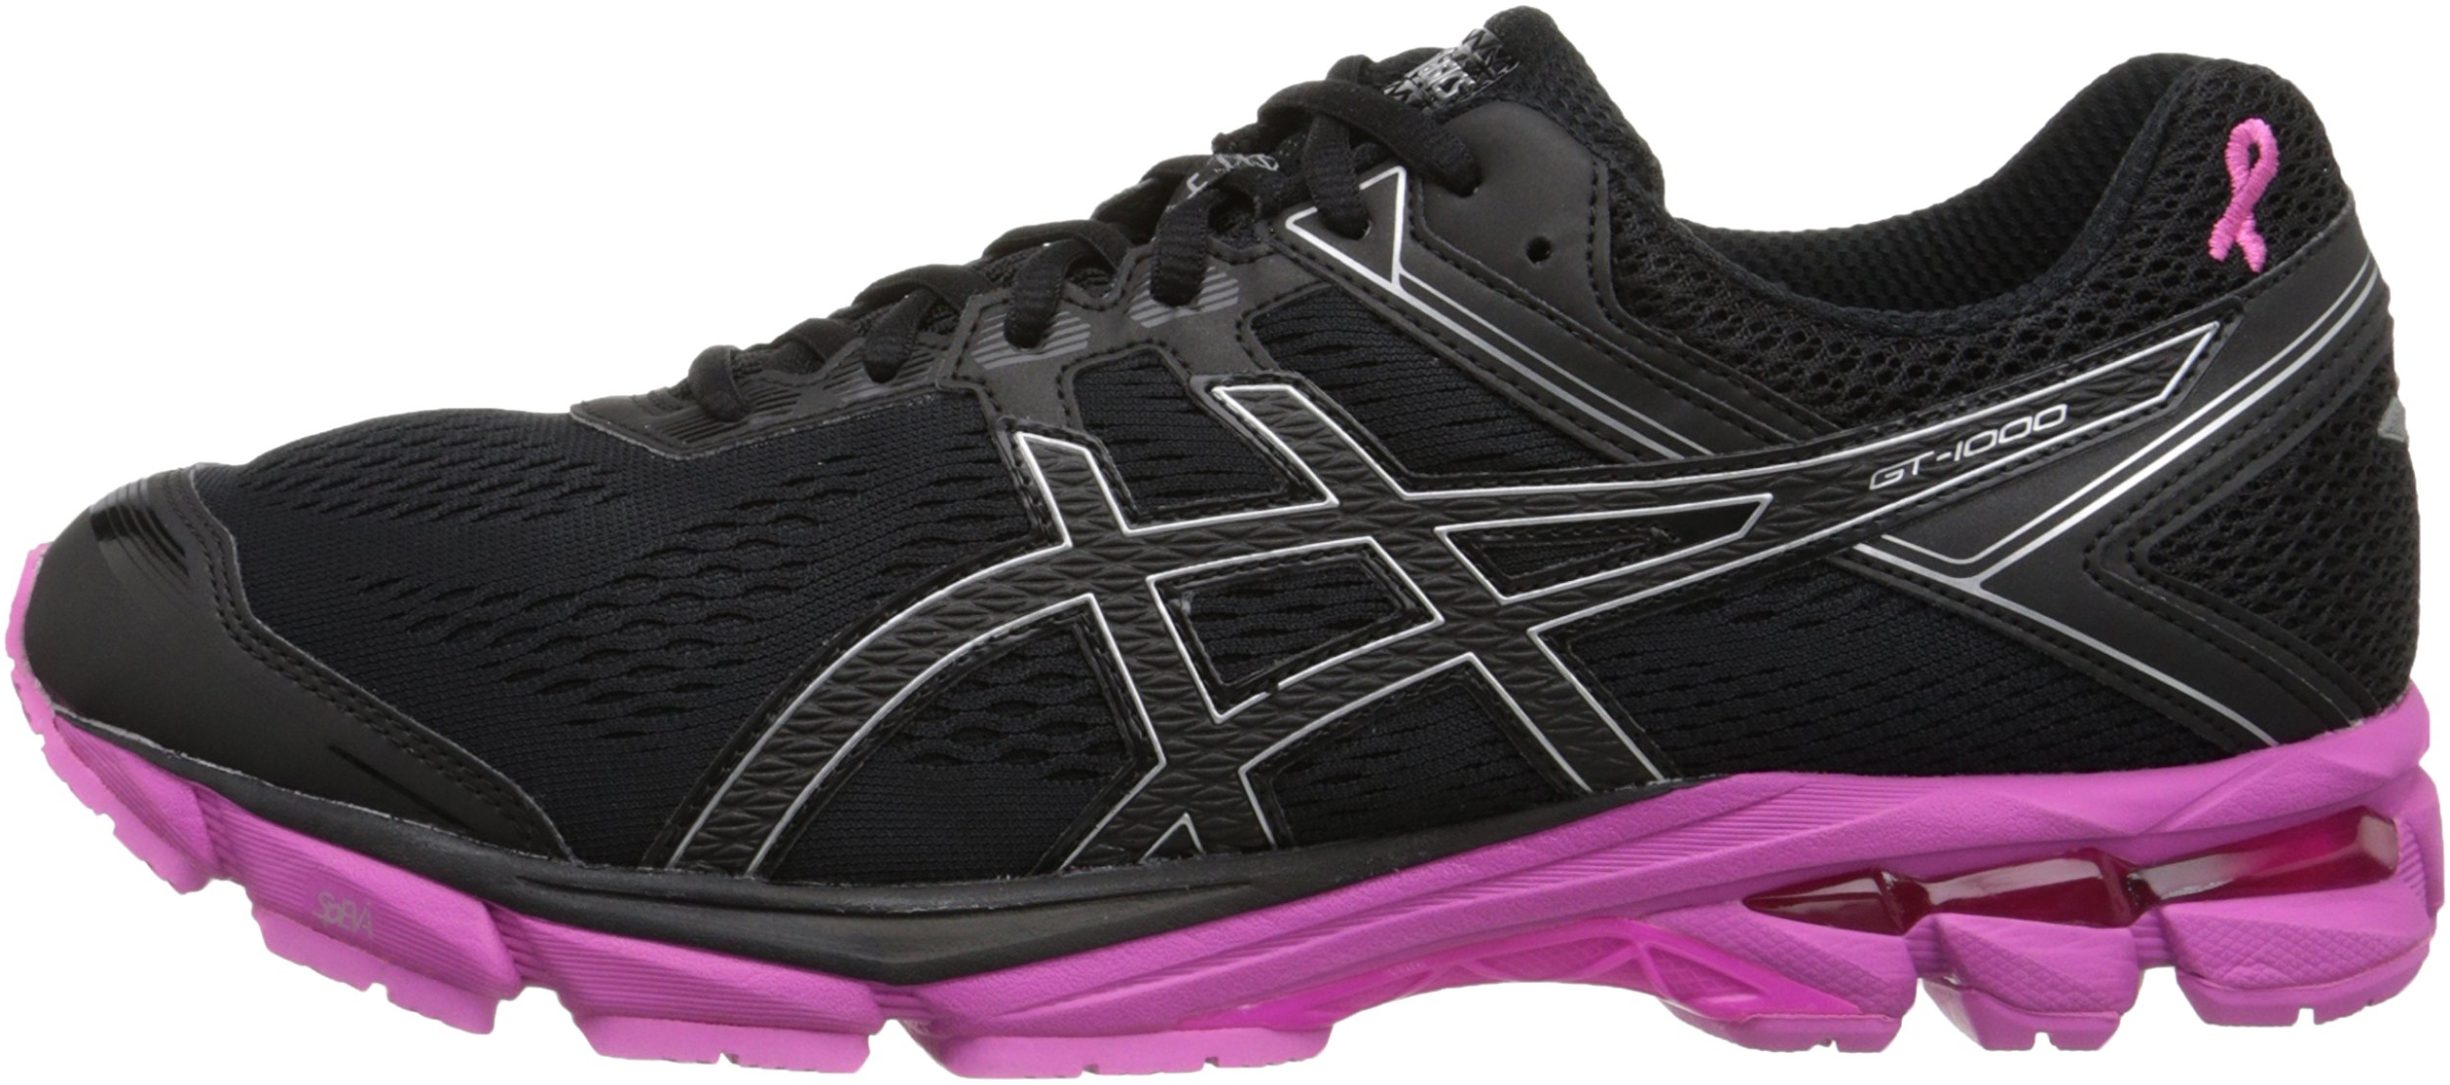 asics gt 1000 review